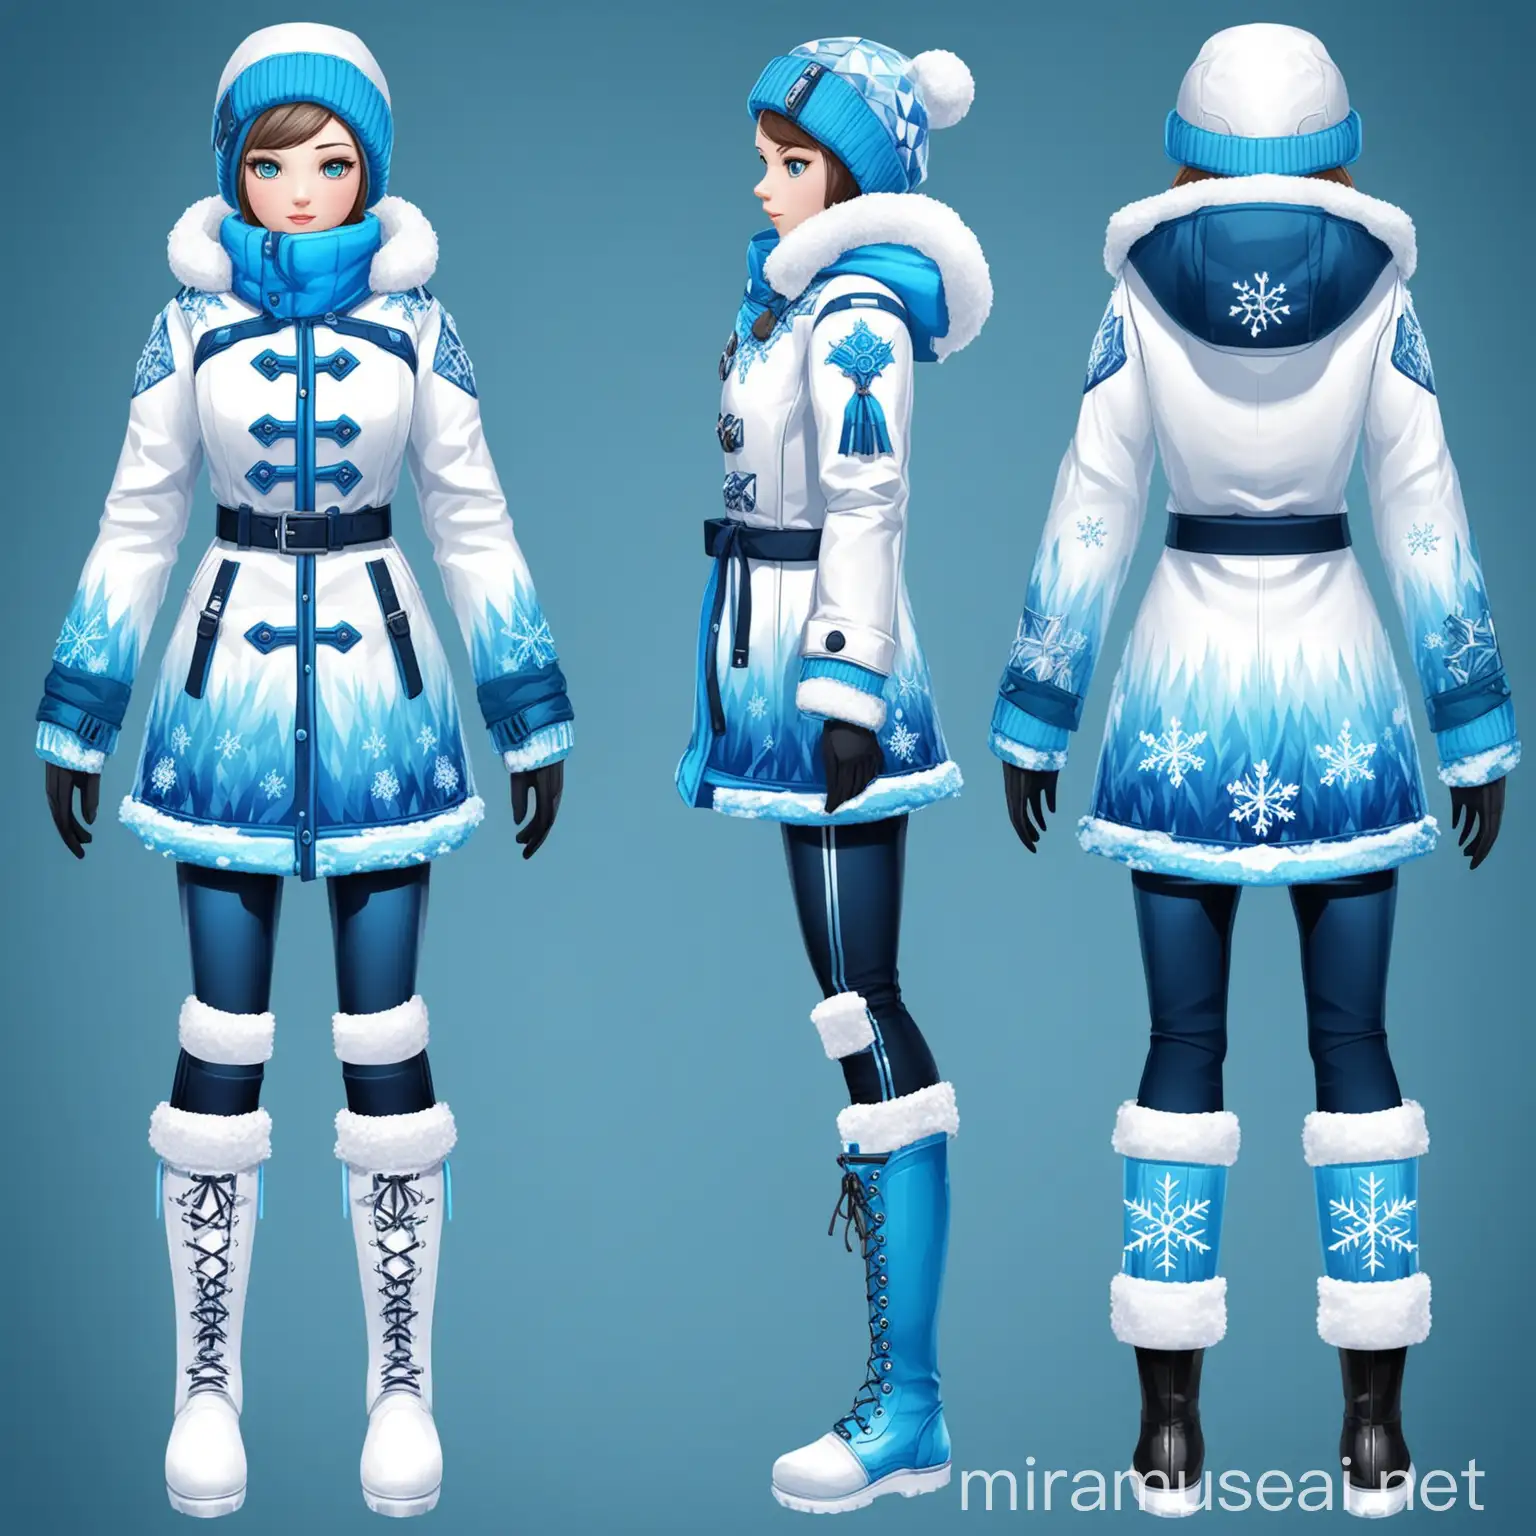  create an outfit with sub theme snow and ice make sure that is is an game outfit and a winter outfit with back and front view
